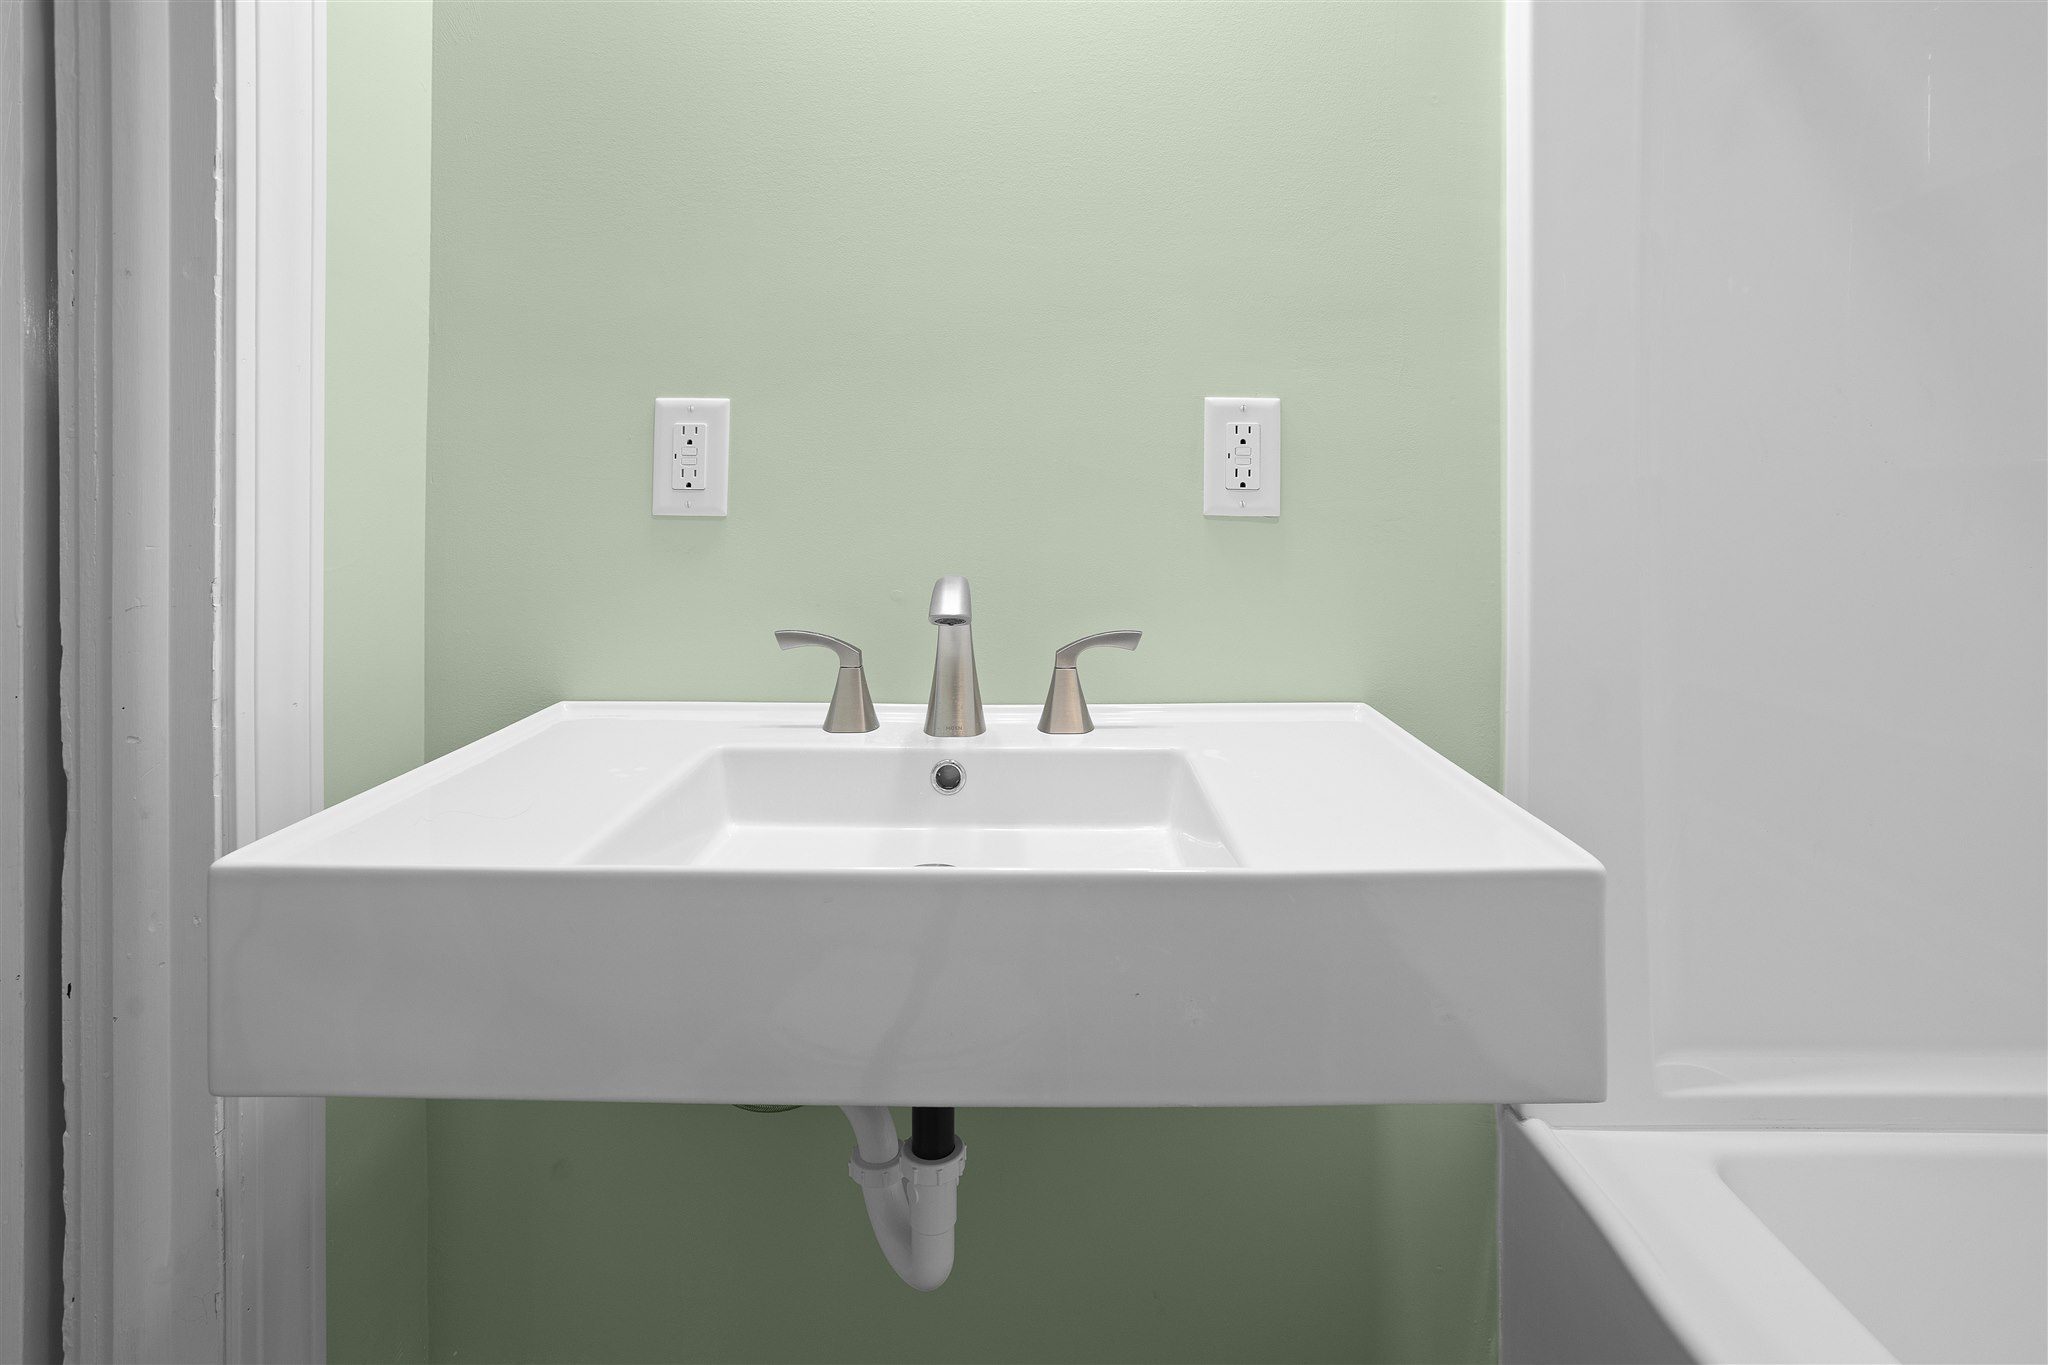 coors can remodel white bathroom sinks